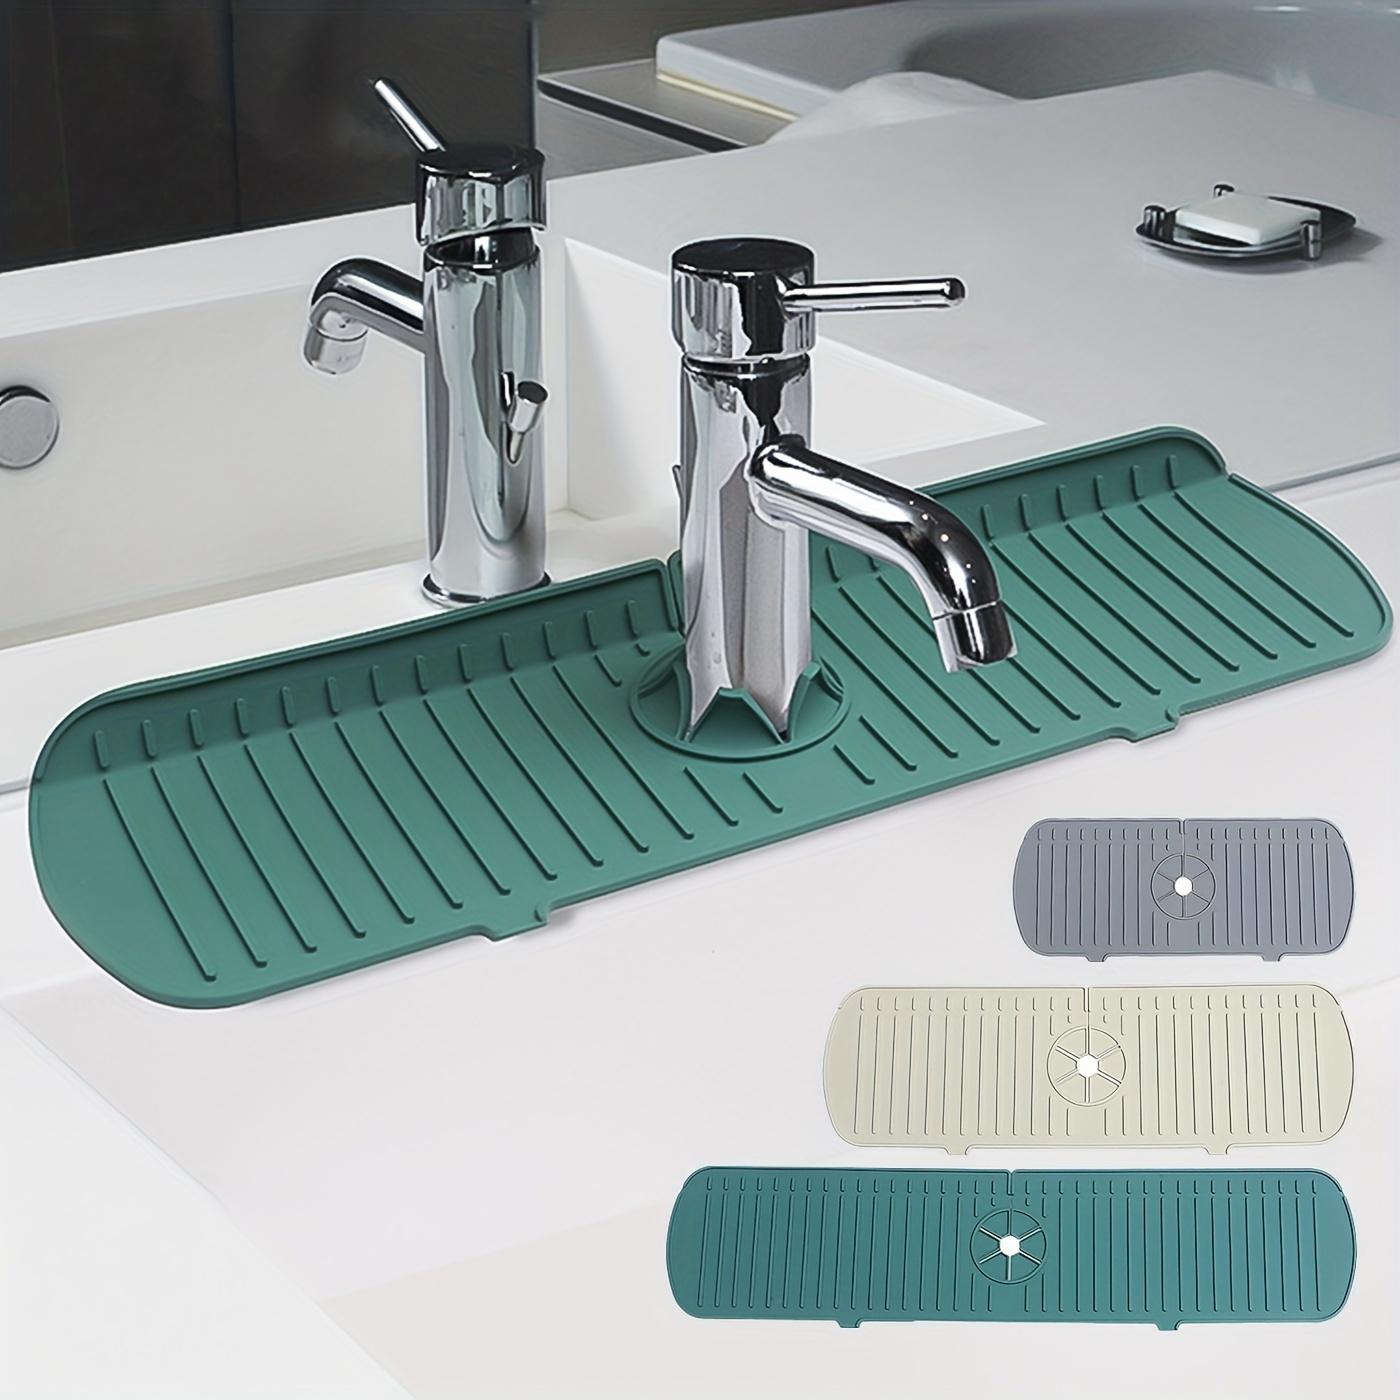 1pc Cream-colored Silicone Sink Drain Mat, Multi-functional Sink Divider  Protector For Kitchen Countertop